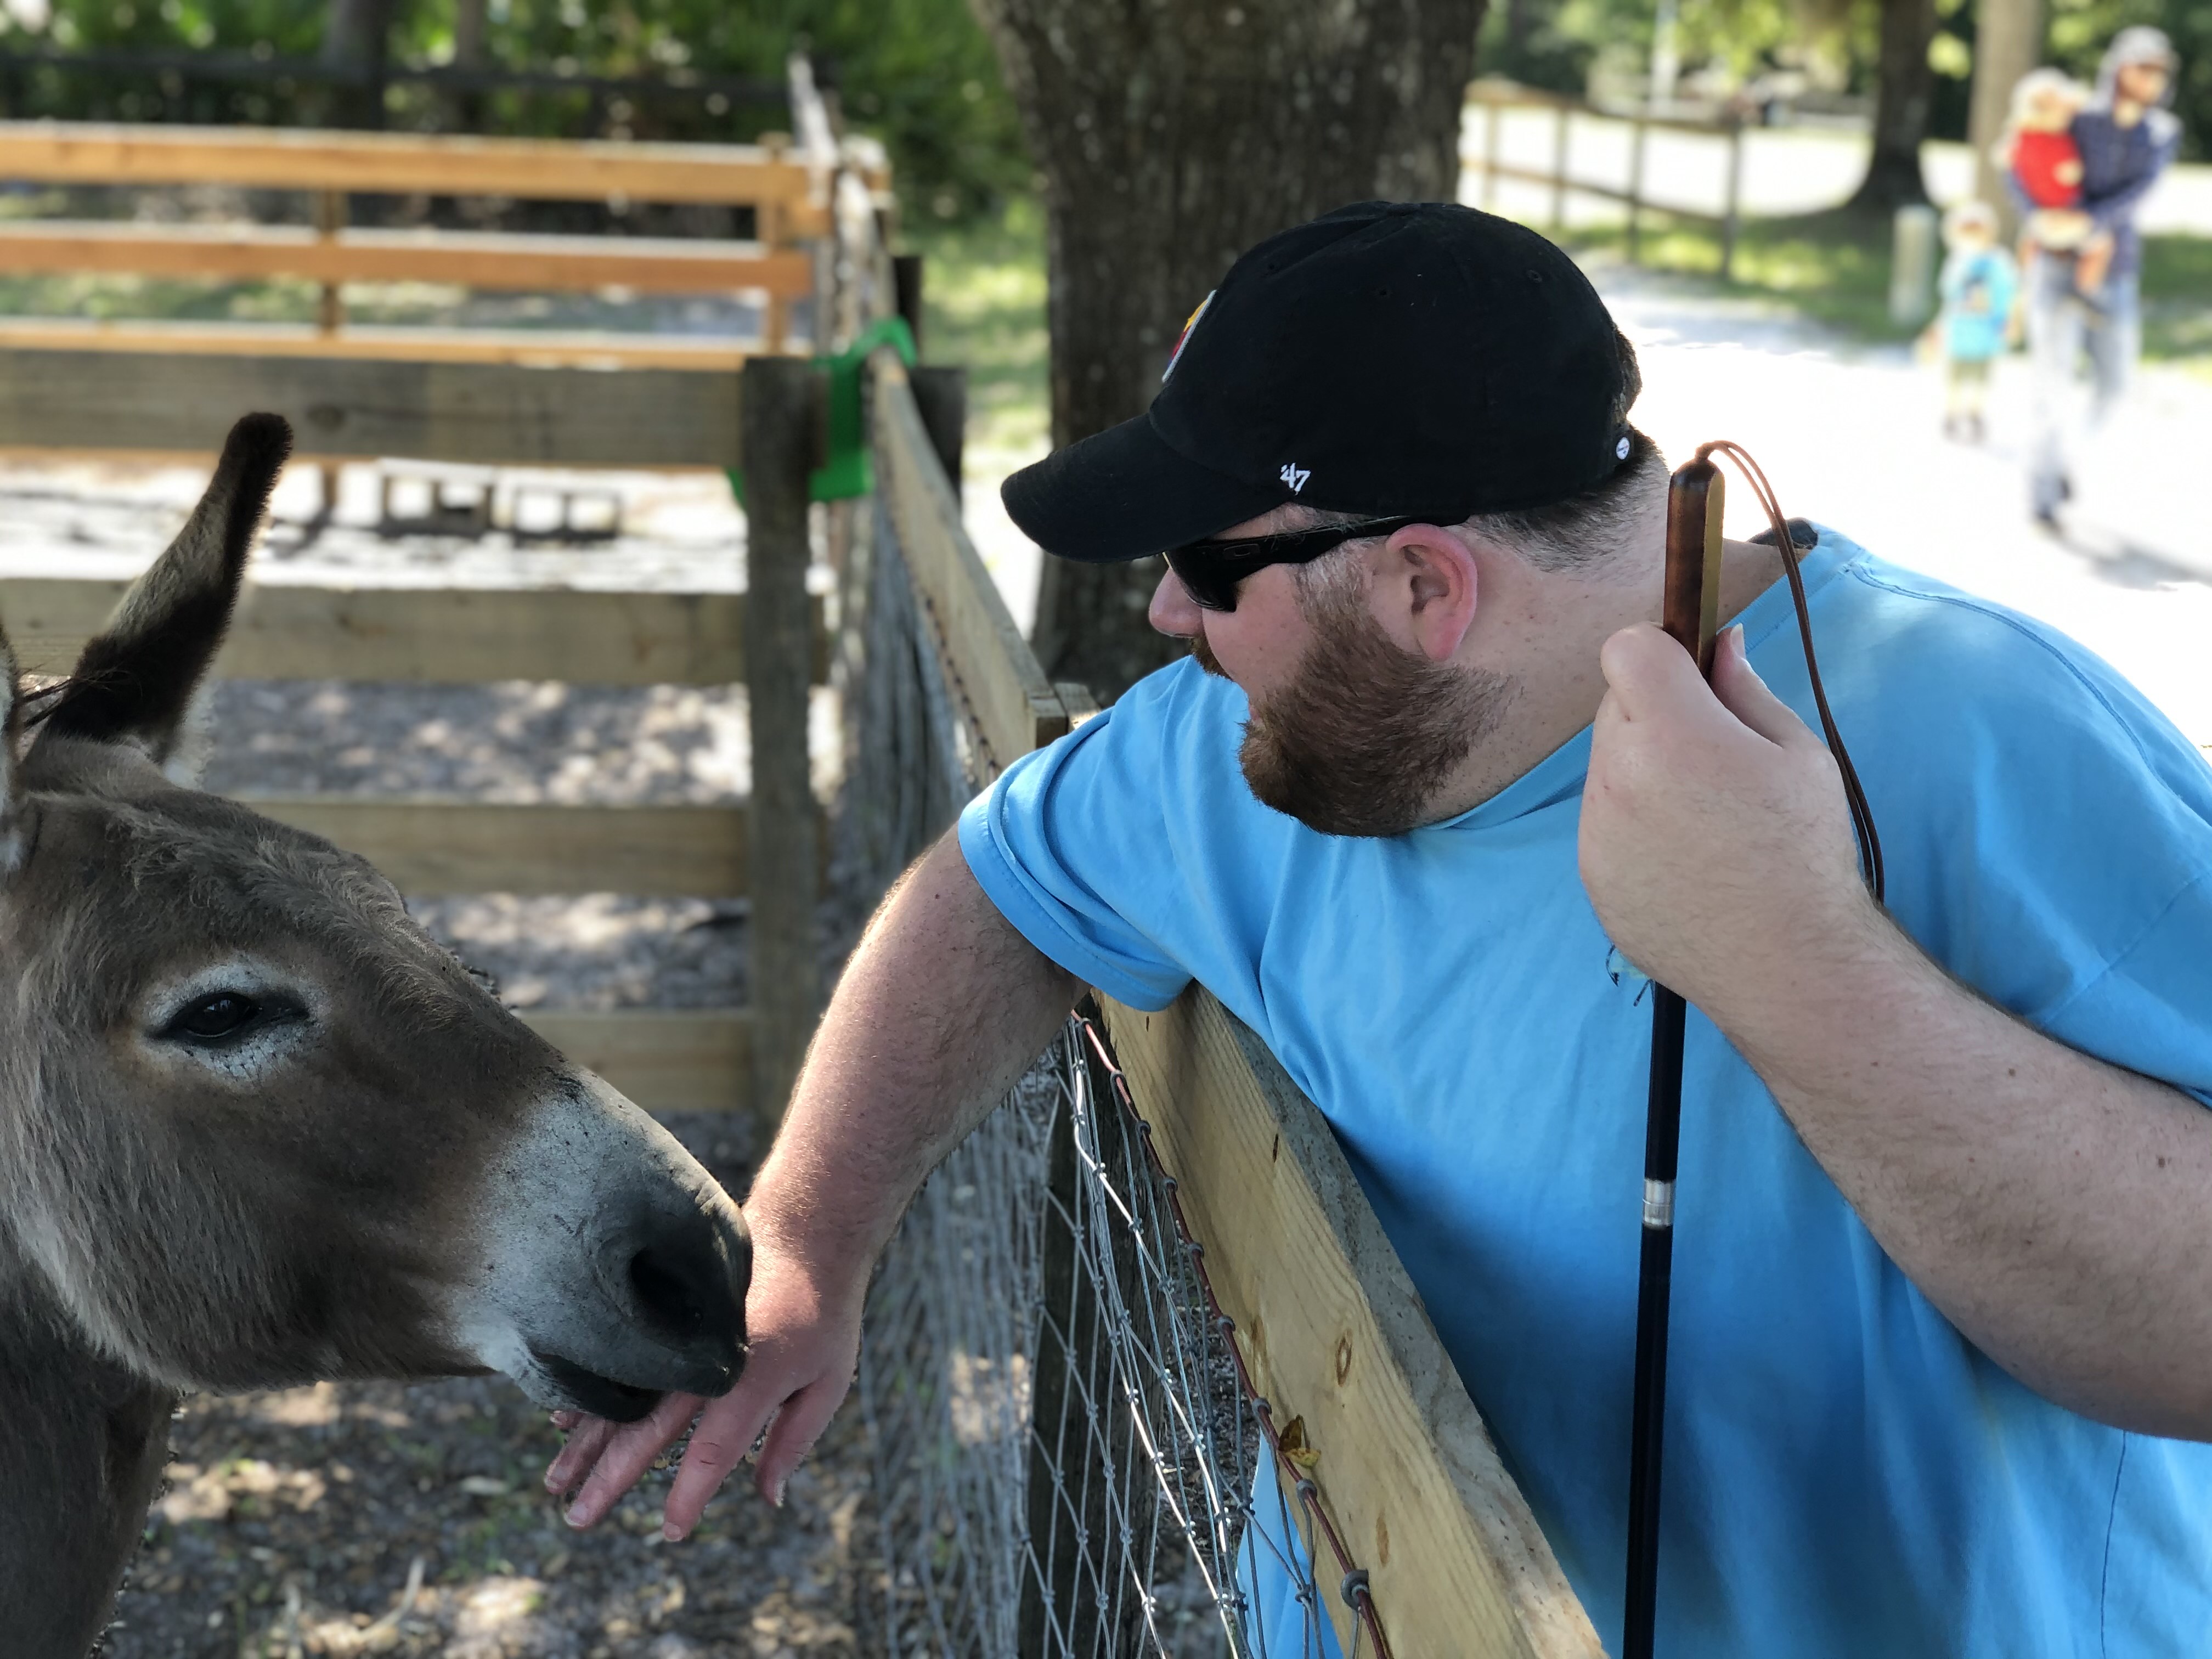 Kevin with Animals at Artisan Acres